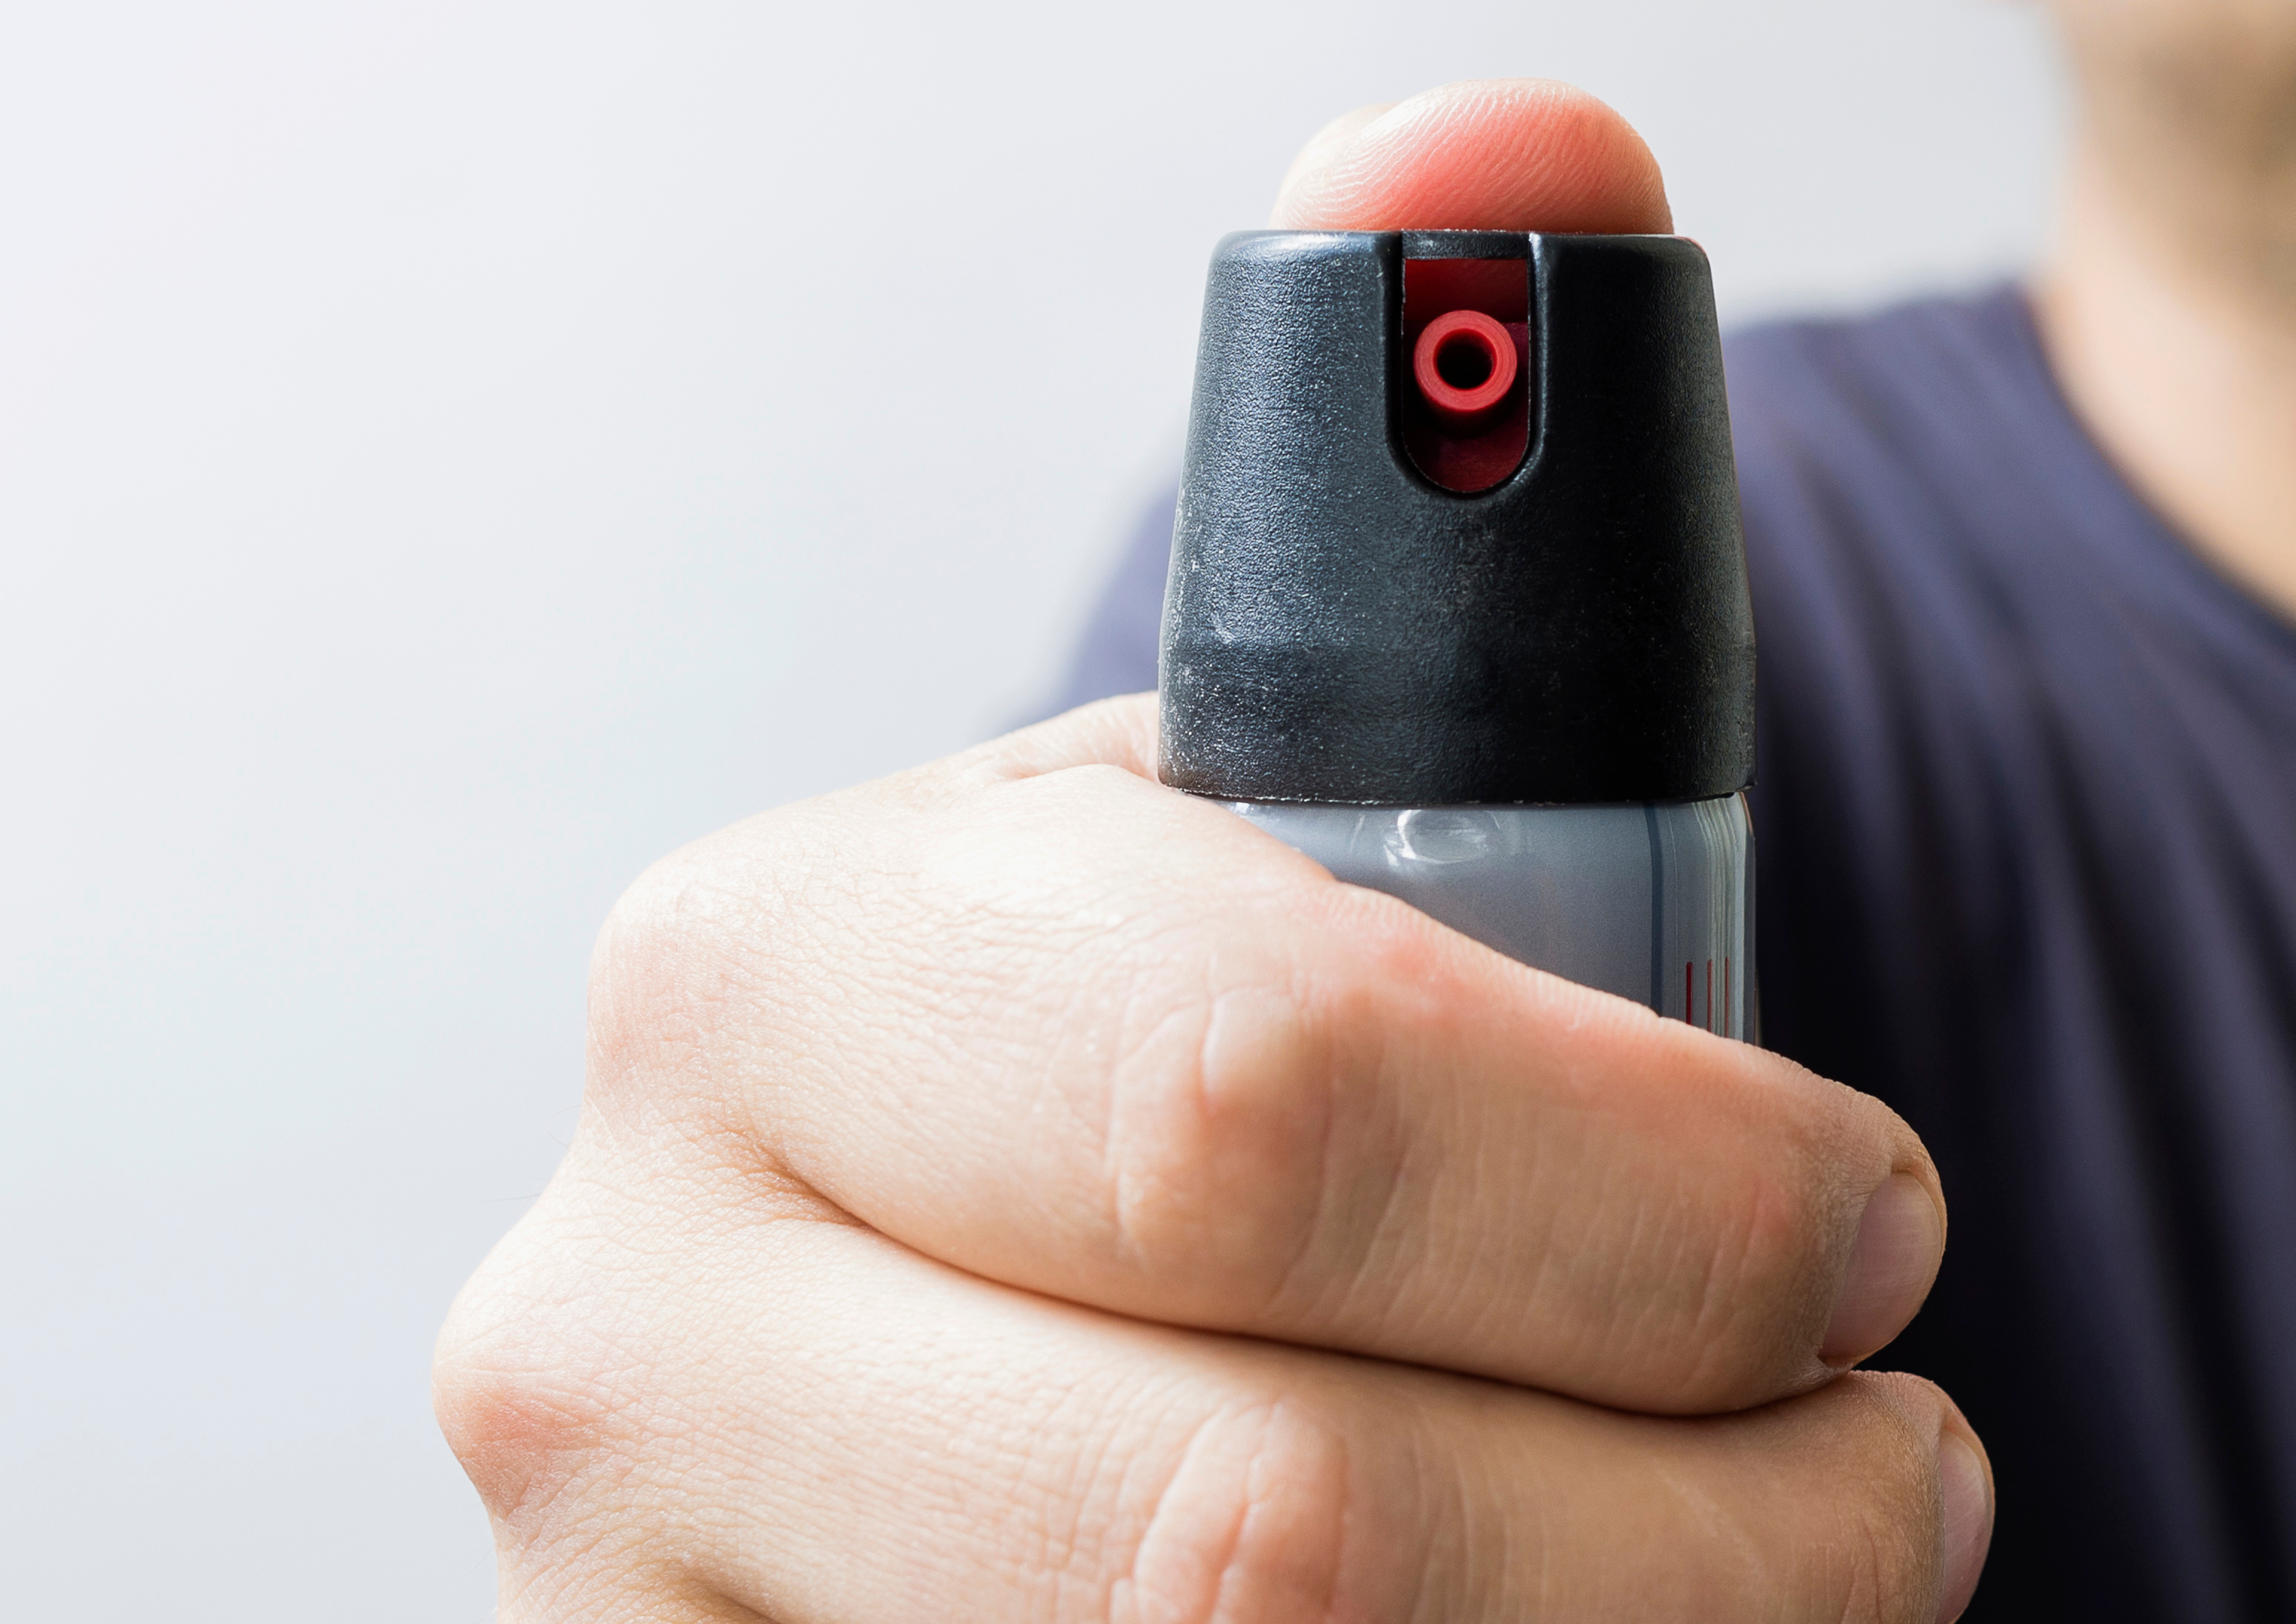 pepper spray south africa - security industry - safe distance - compact - secure - fingertips